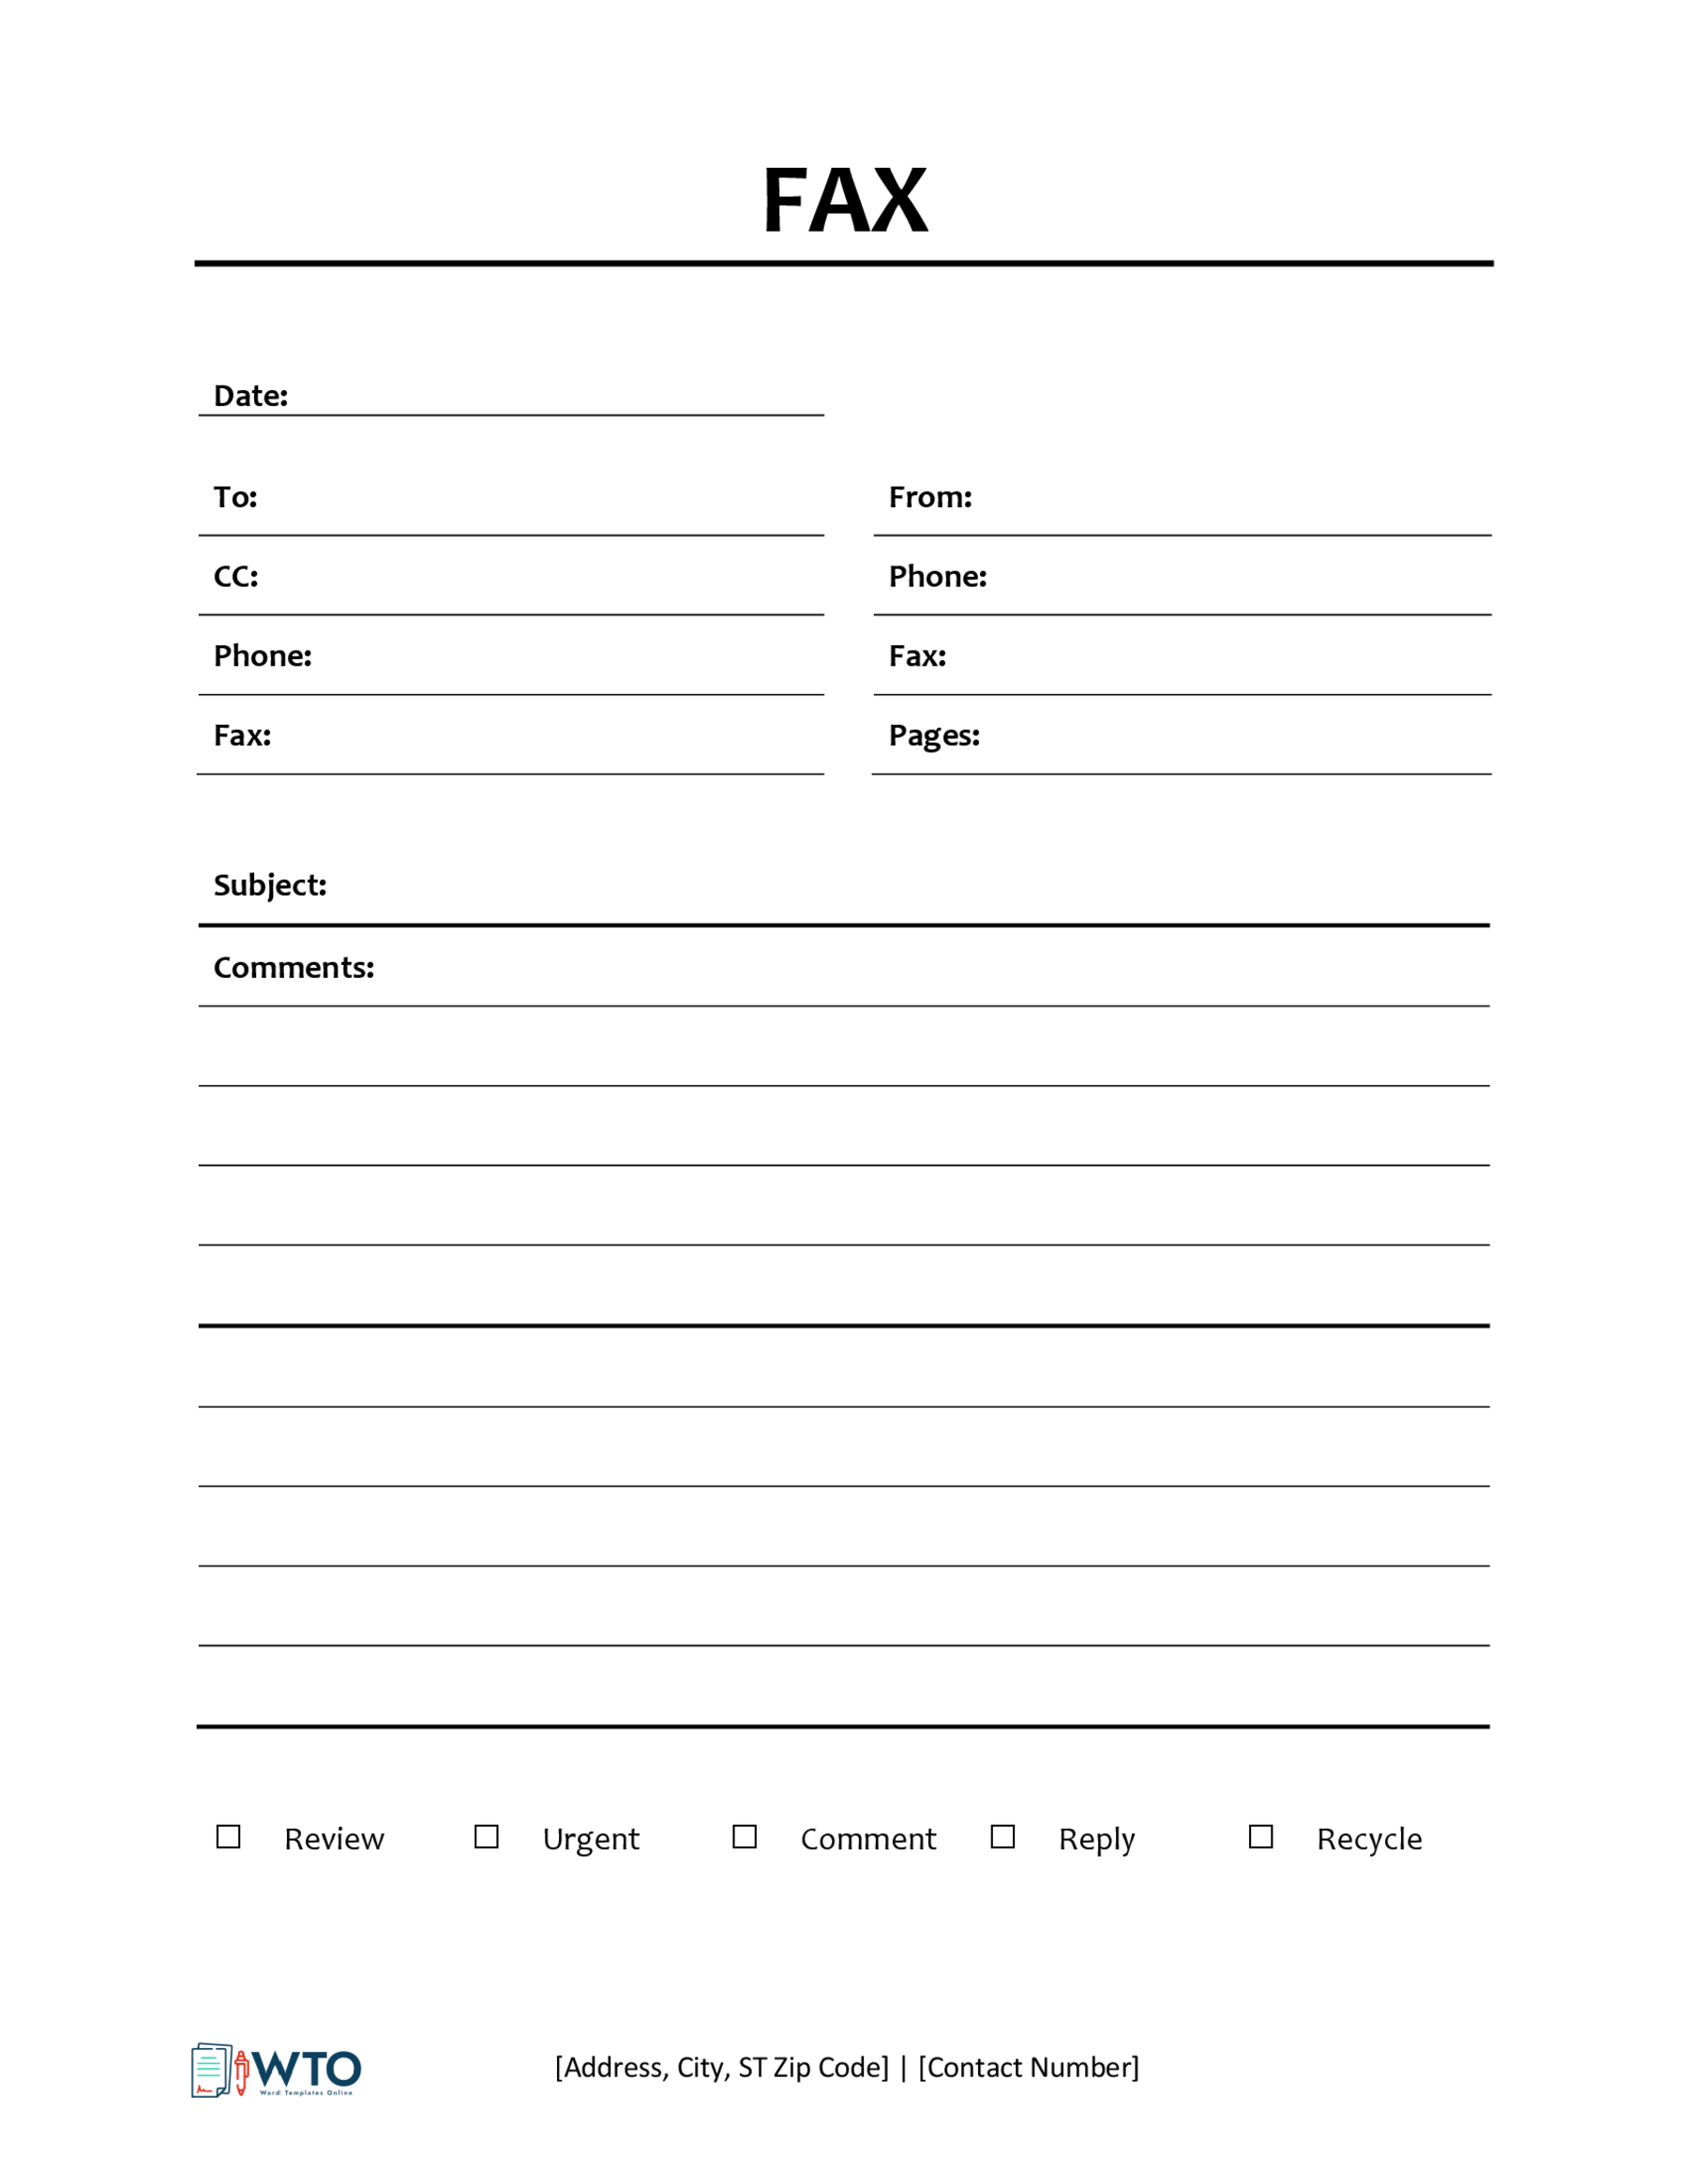 Fax Cover Sheet Template for Free